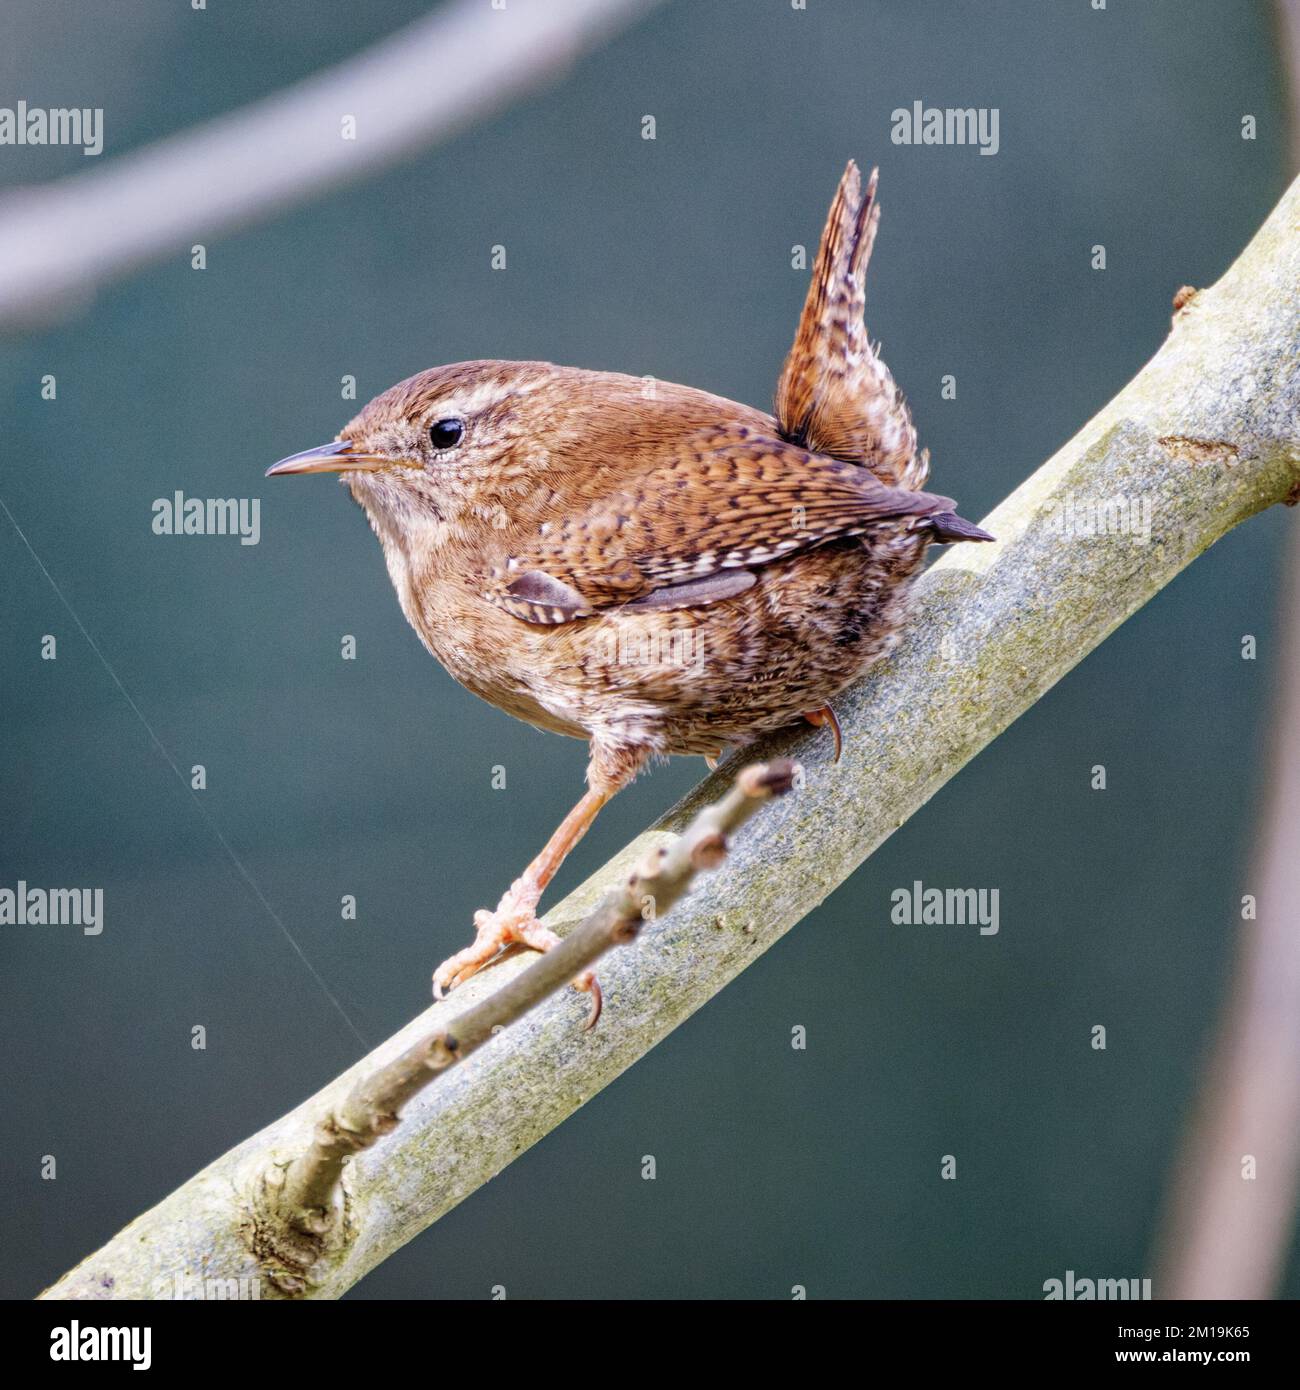 Wren perched on tree branch Stock Photo